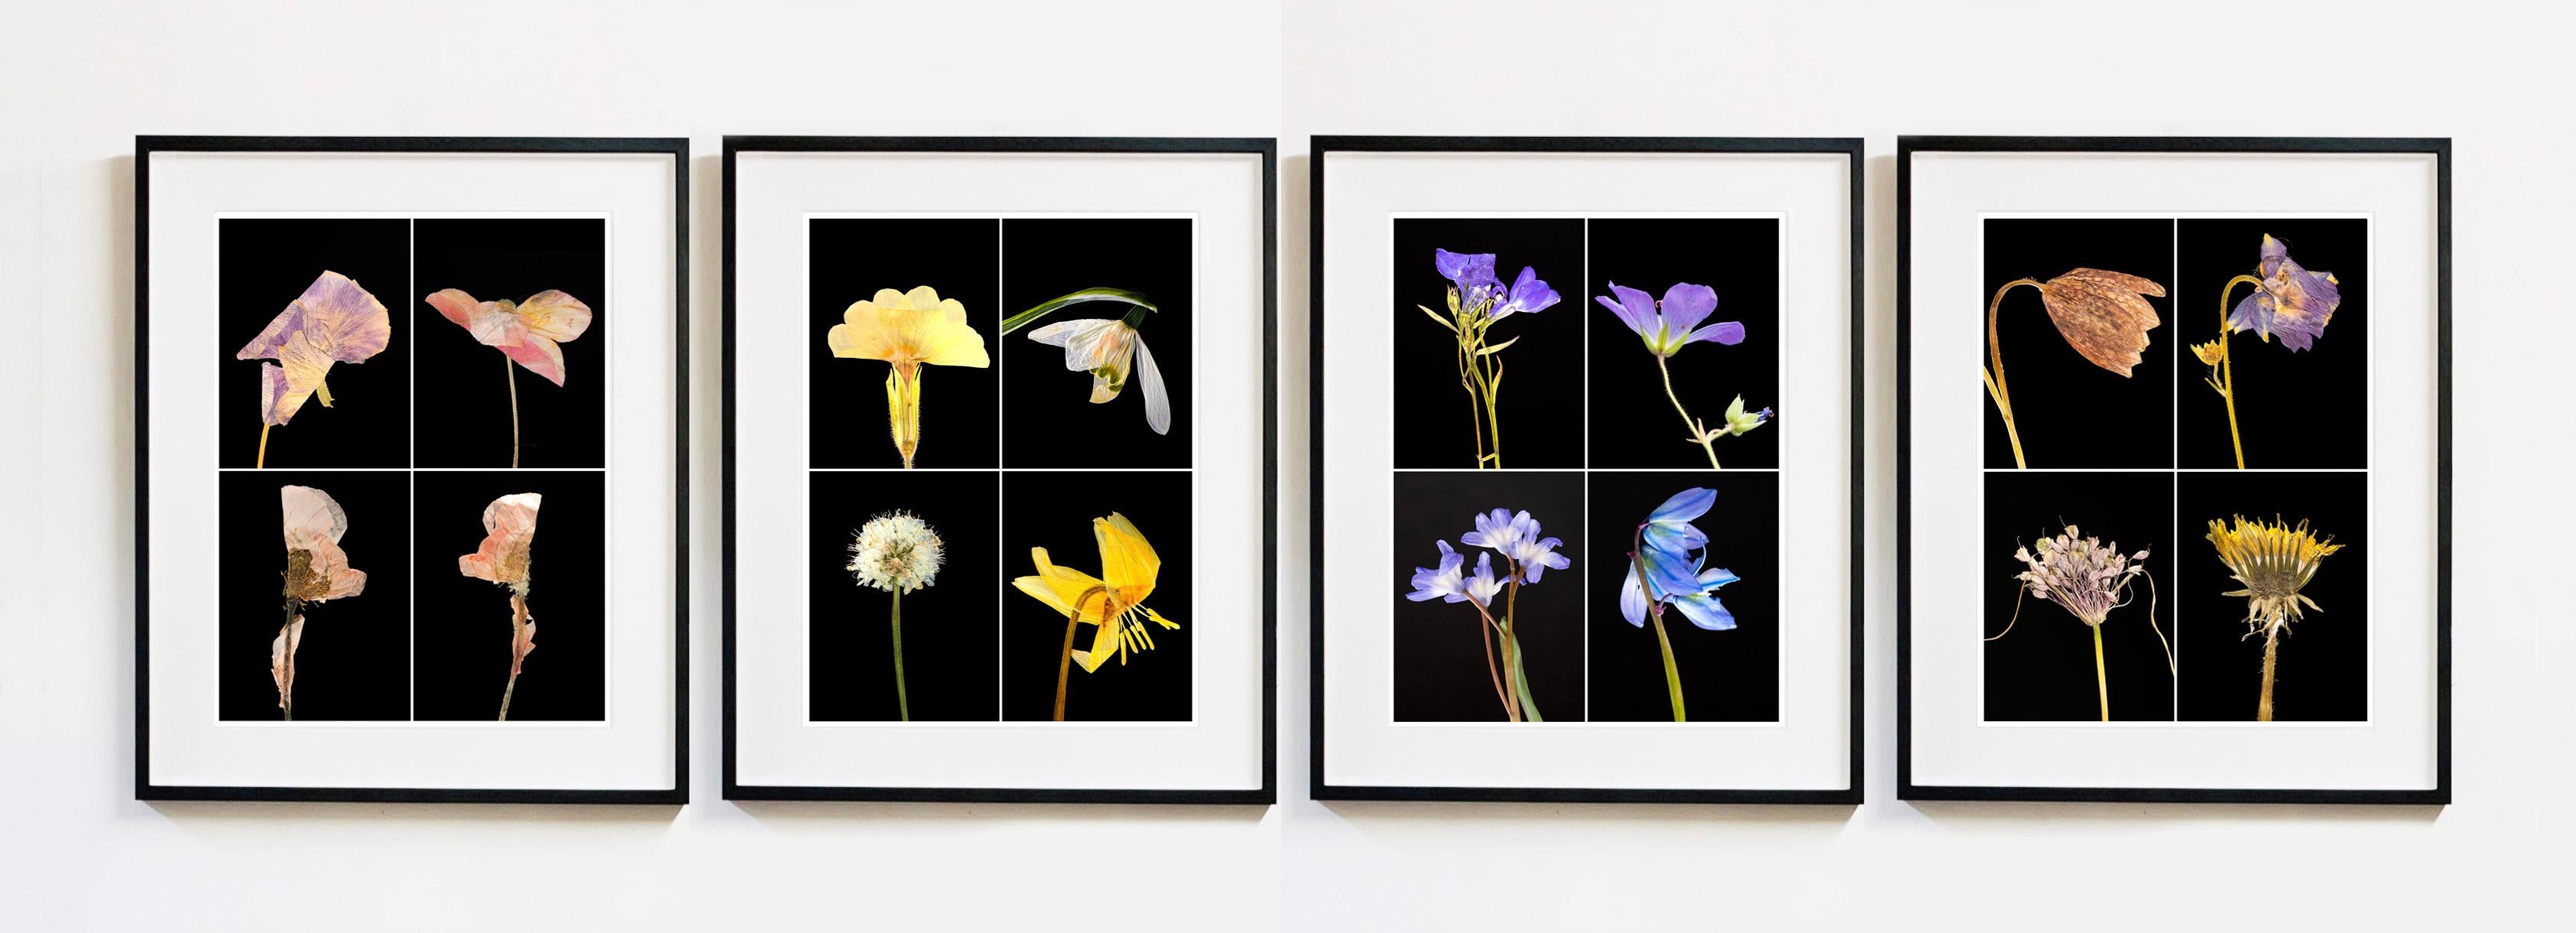 Pansy - Floral Botanical Nature Color Photograph For Sale 5